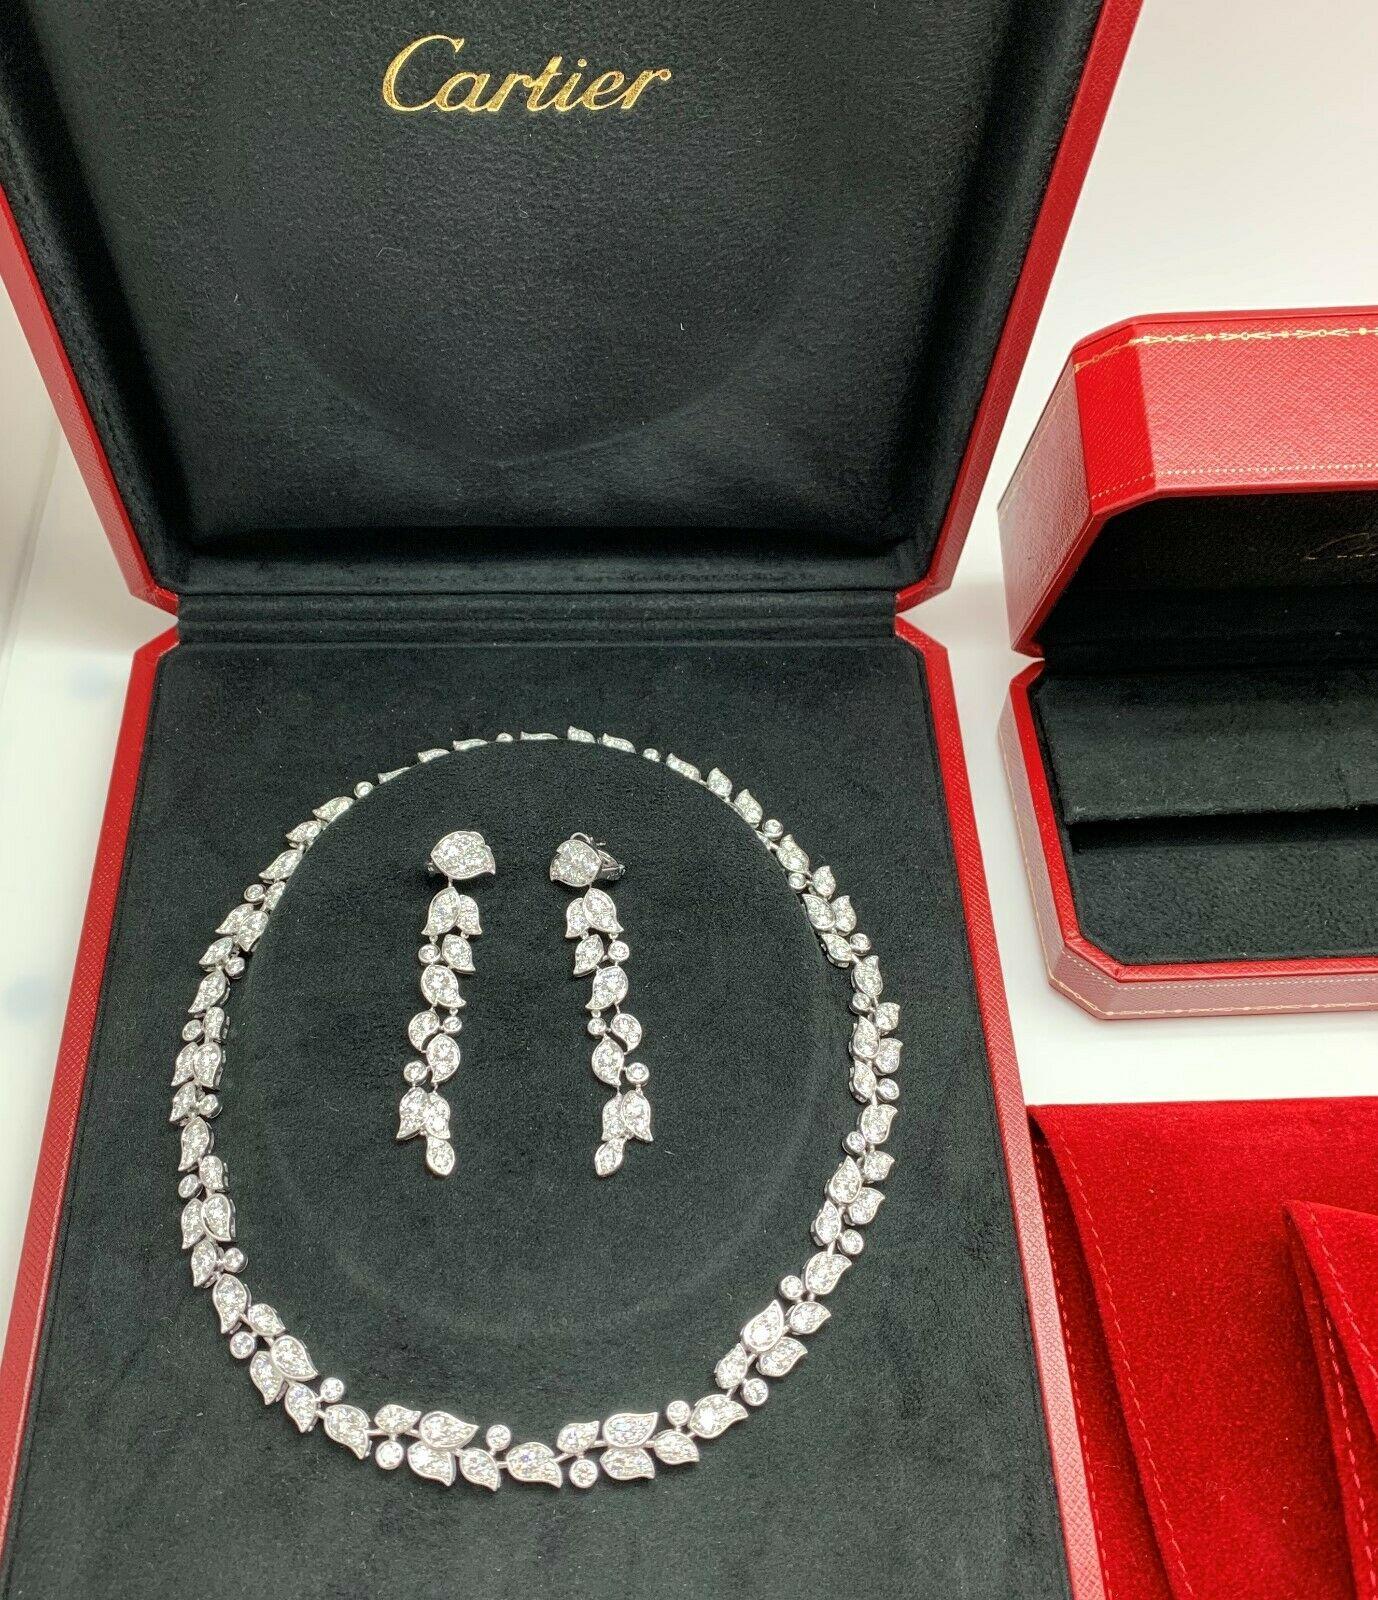 cartier necklace and earrings